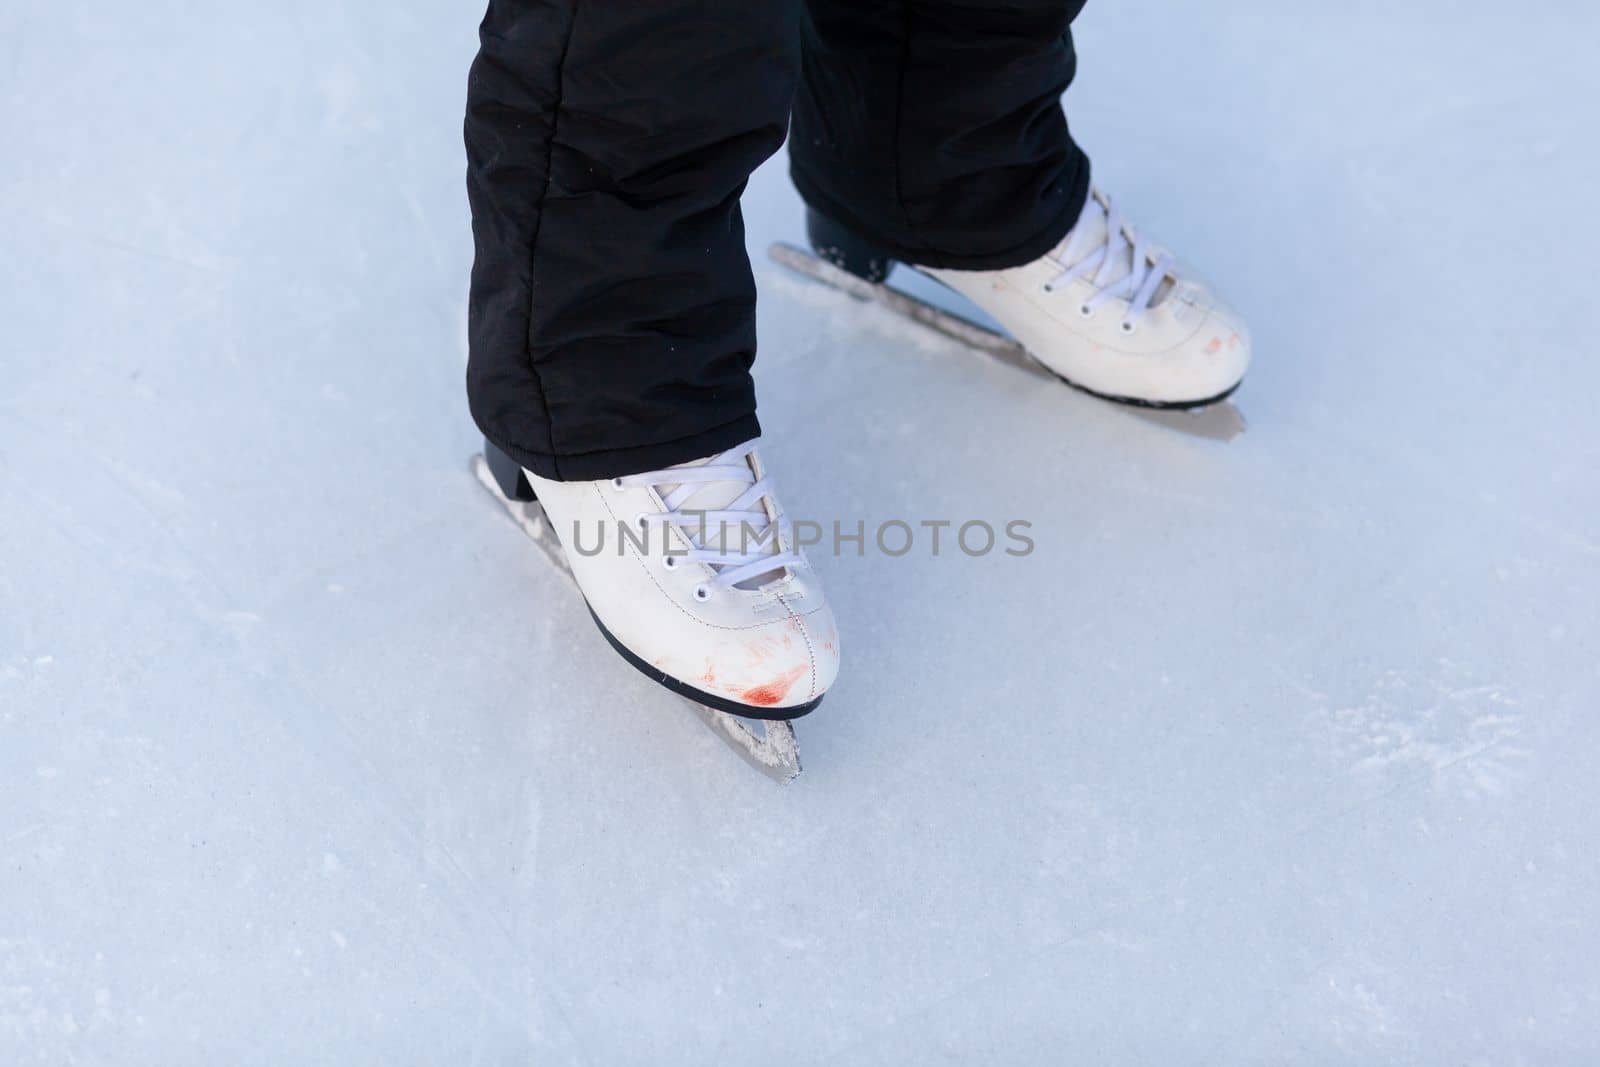 A pair of hockey skates with laces on frozen ice rink closeup. Ice skating or playing hockey in winter. ice and legs and copy space over ice background with marks from skating